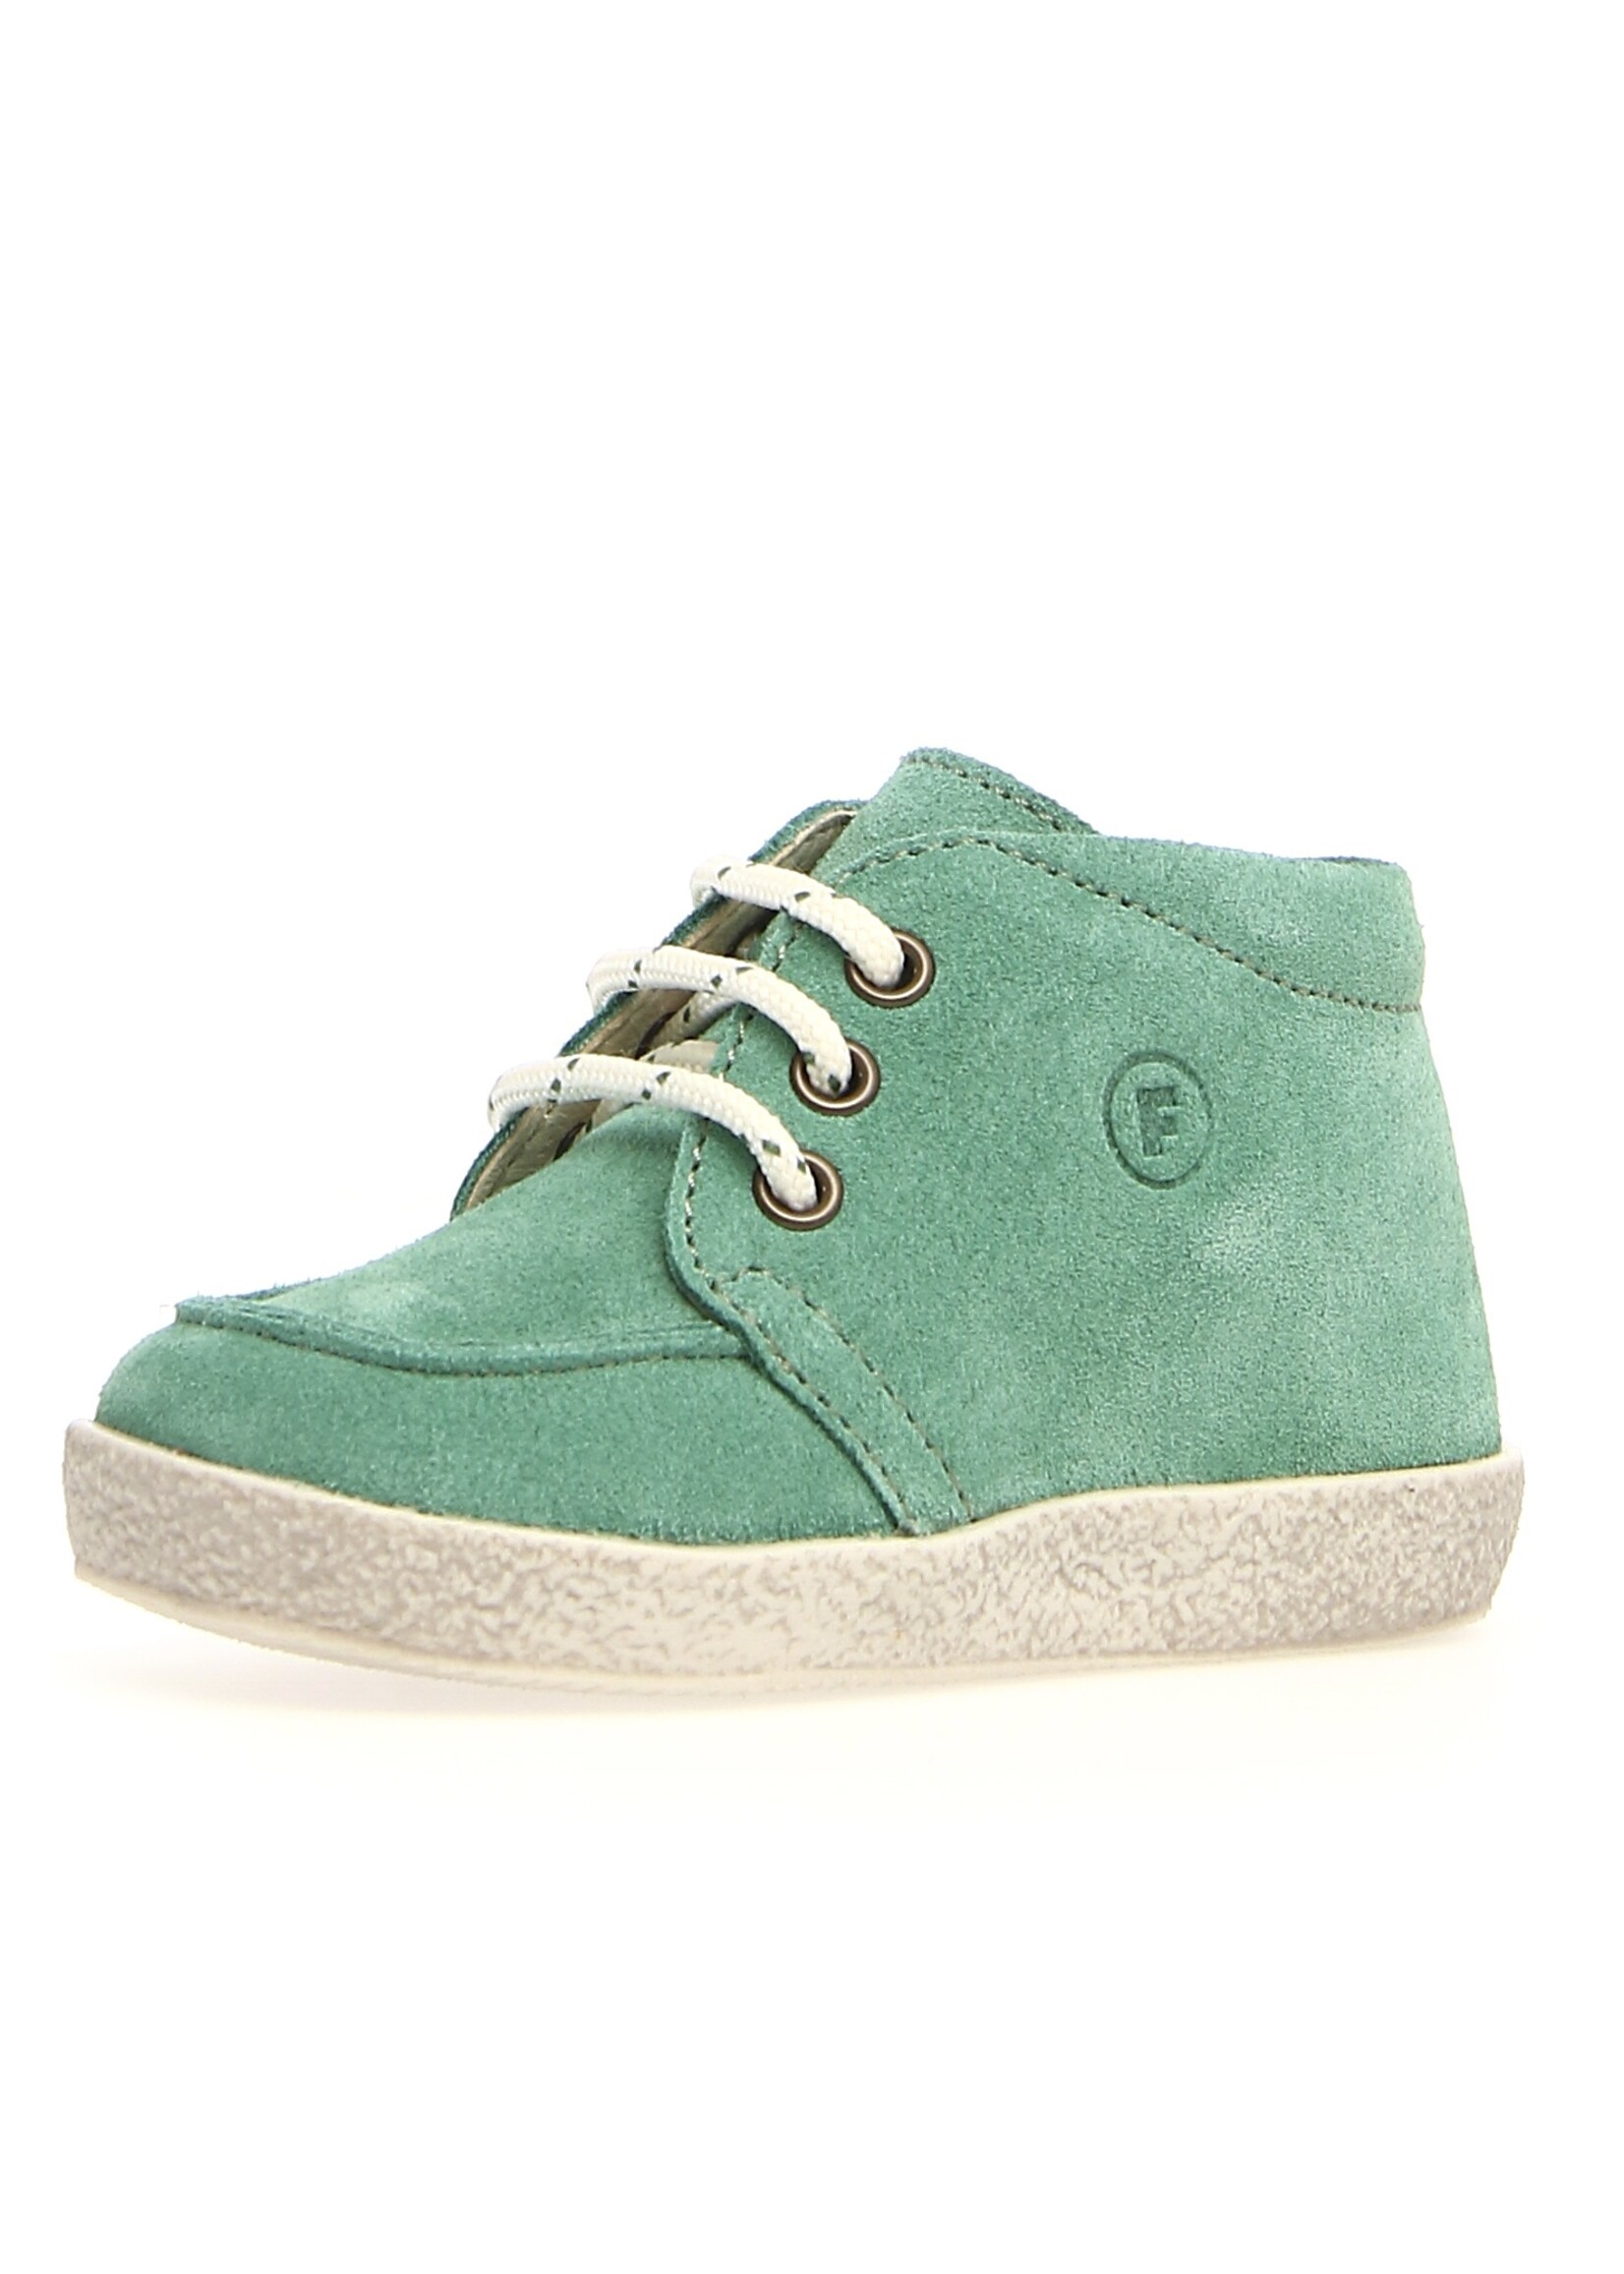 Falcotto Ostrit suede green